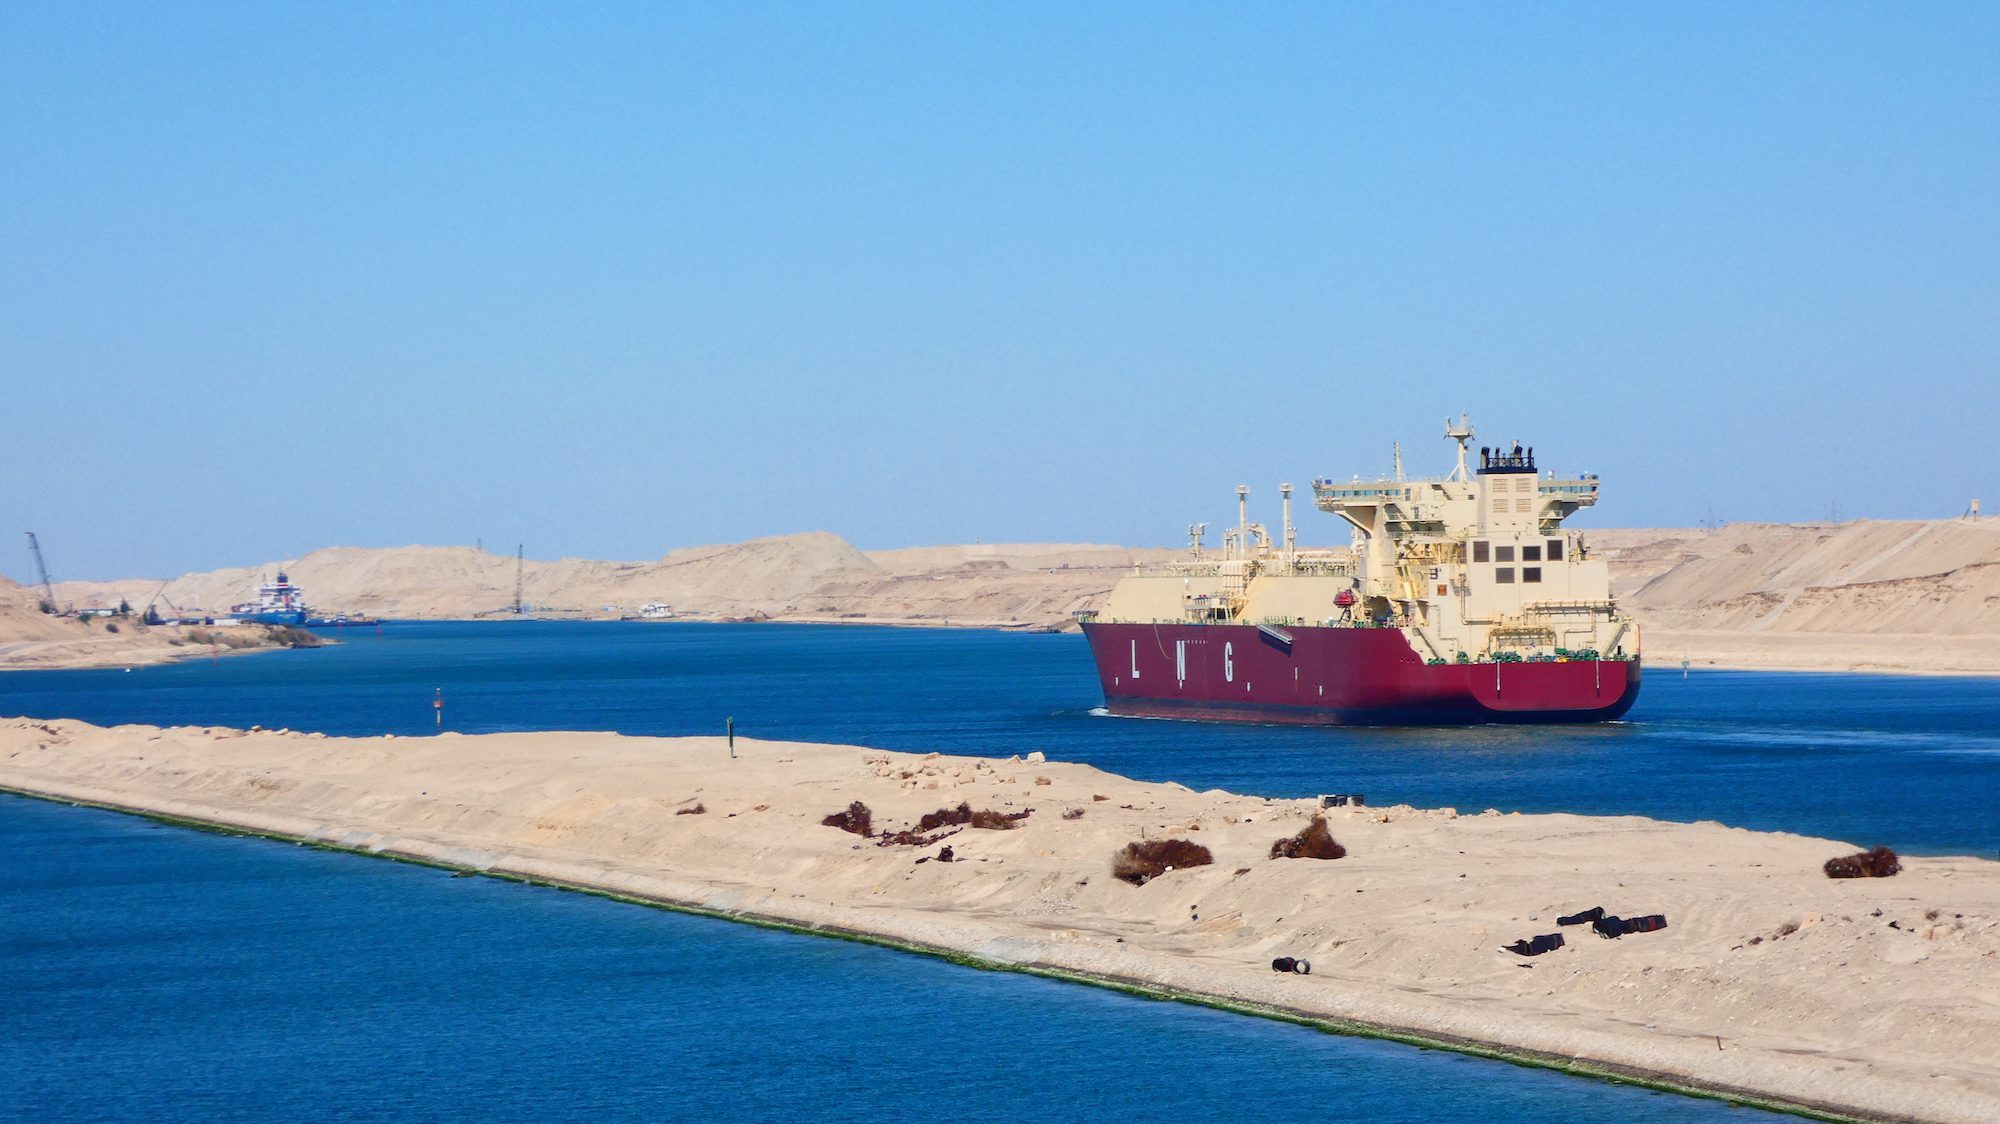 LNG Carriers Change Course from Red Sea as Qatar Warns of Escalation